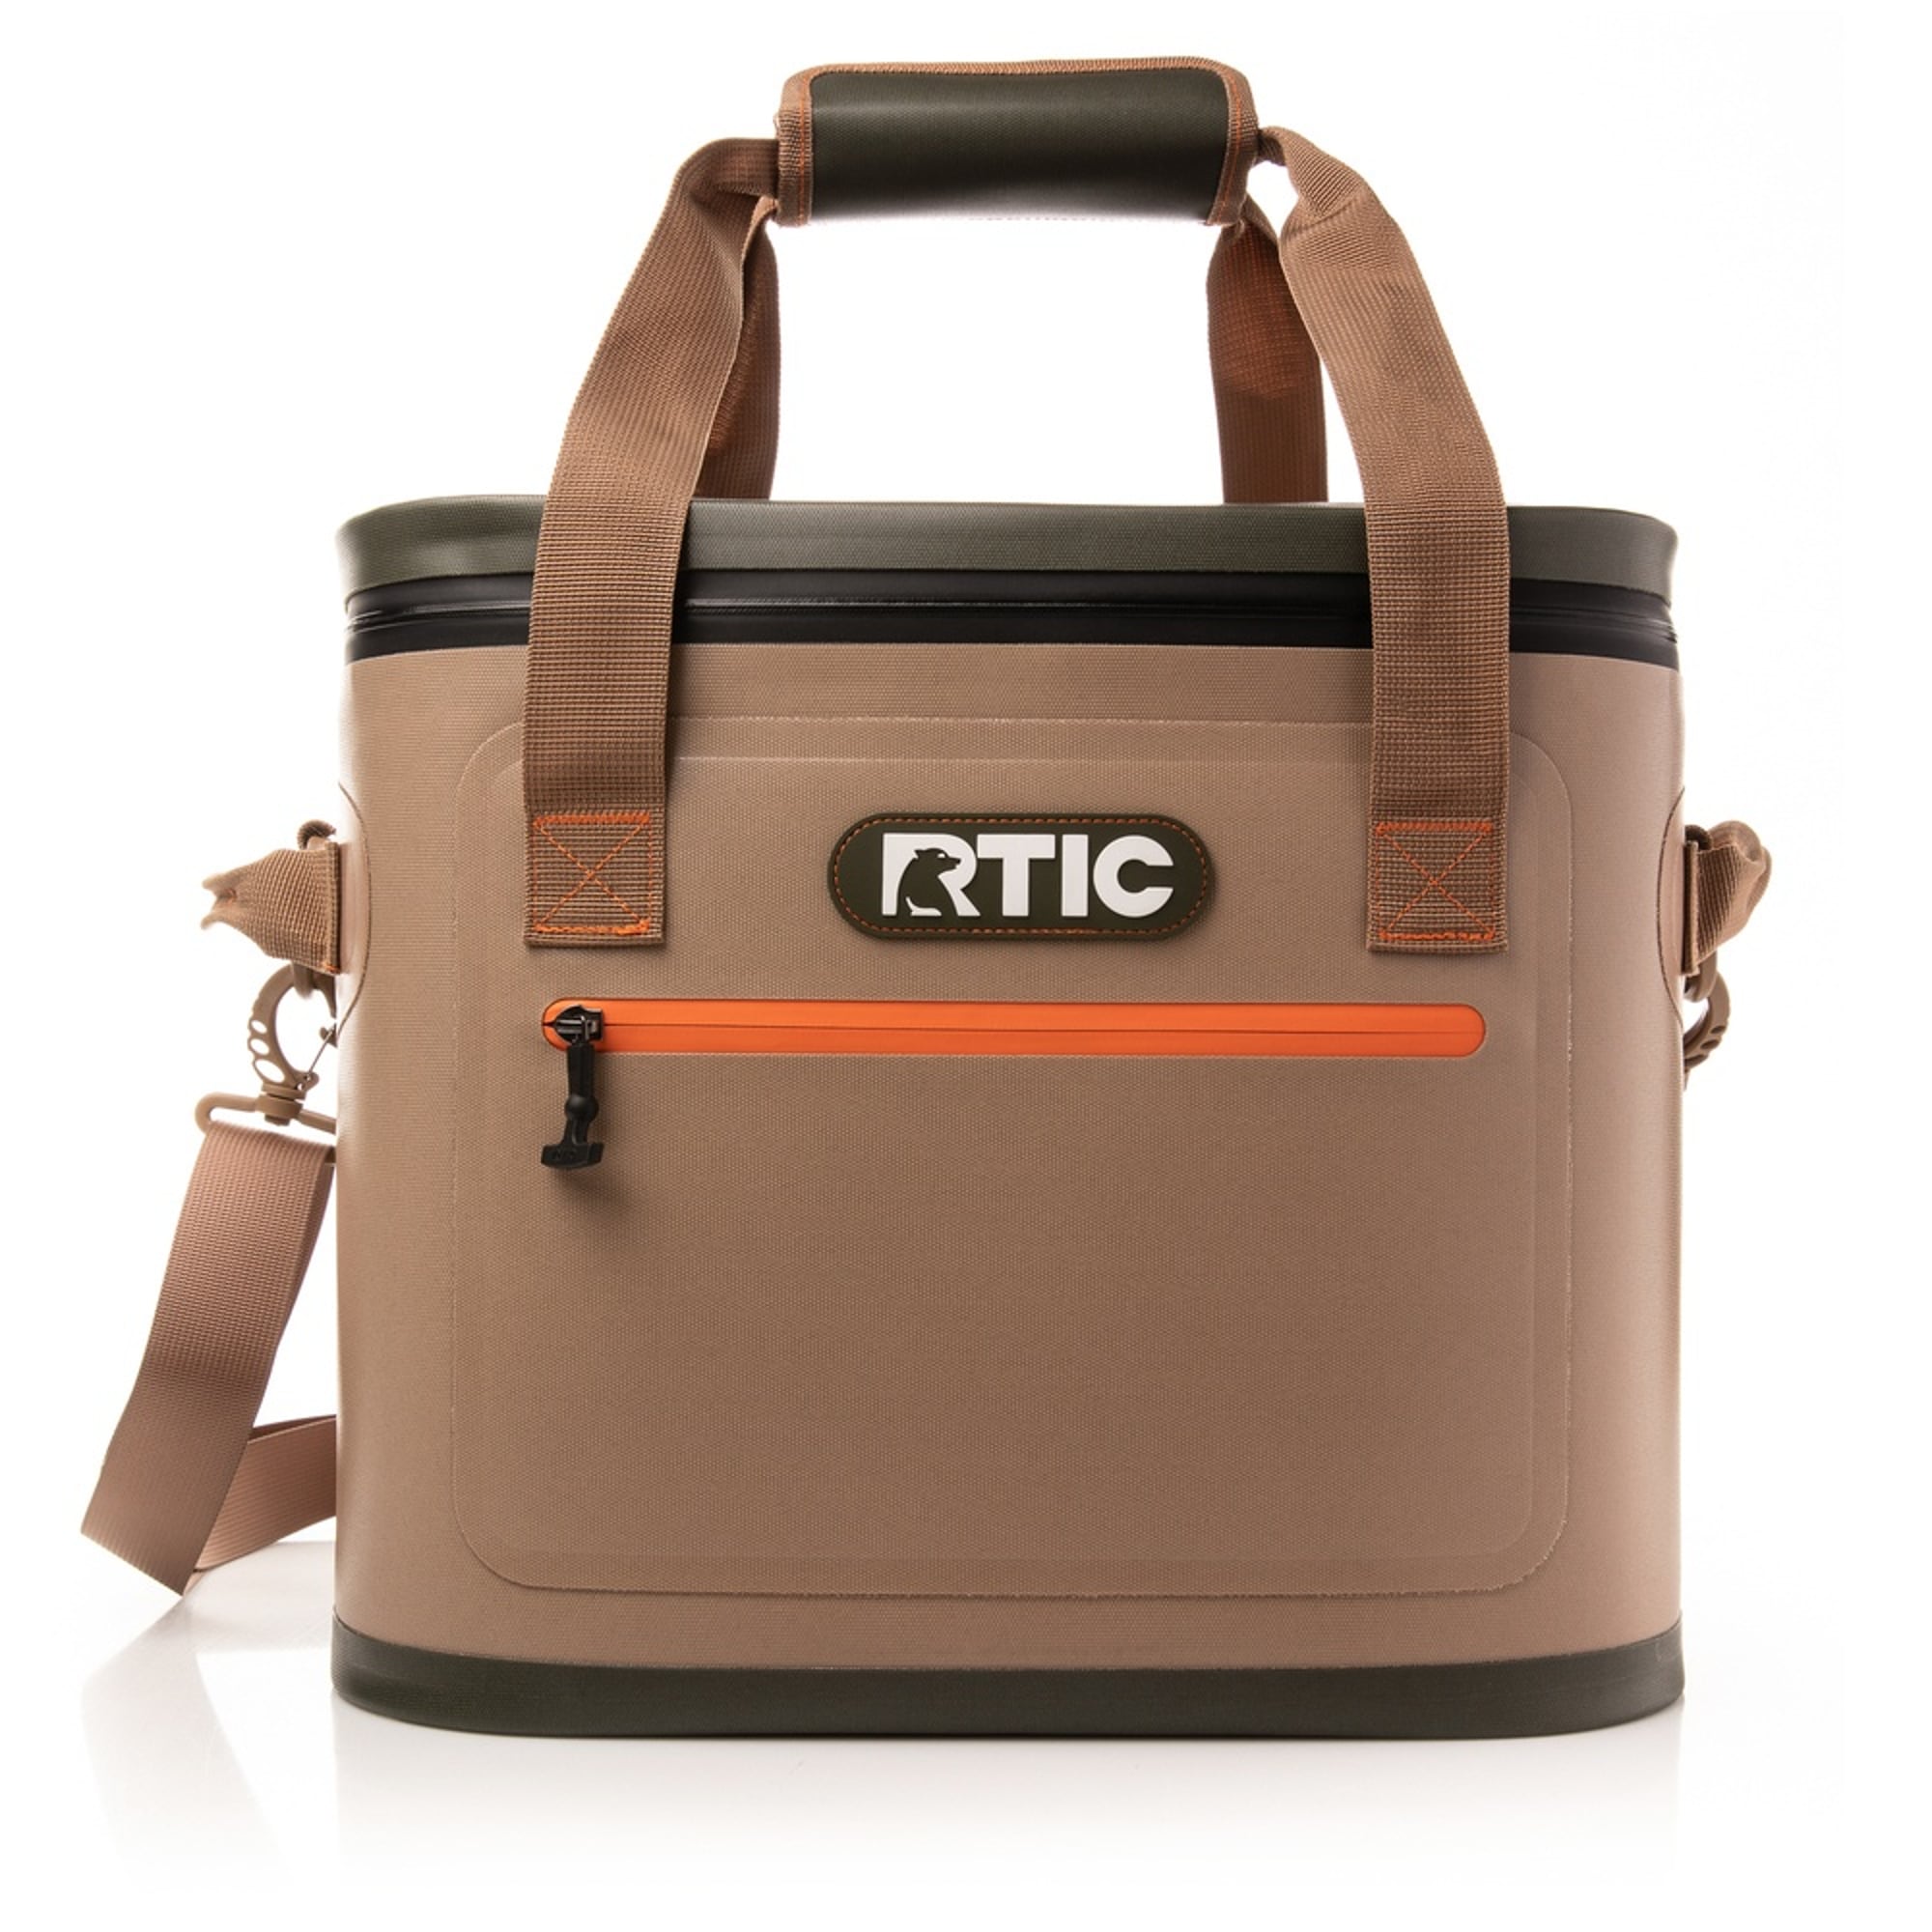 RTIC Can Koozie done in Brown/tan and Transparent Gold